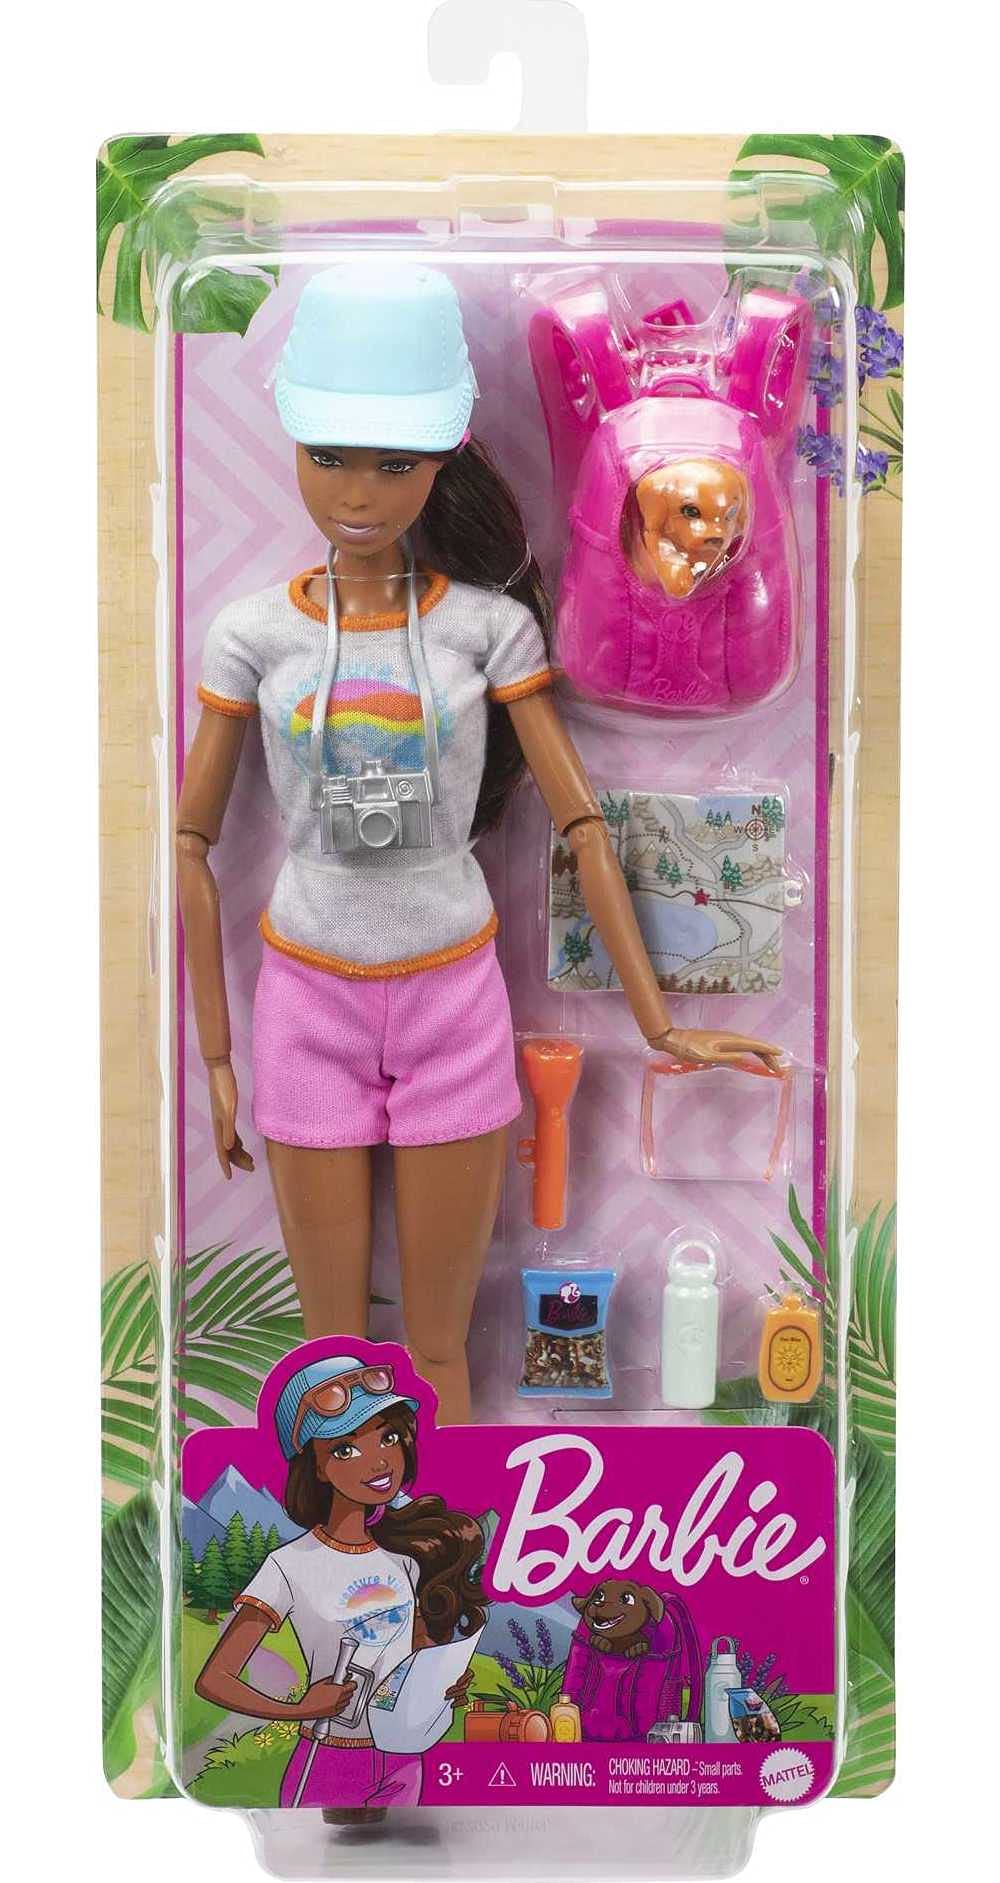 Barbie Hiking Doll, Brunette, with Puppy & 9 Accessories, Including Backpack Pet Carrier, Map, Camera & More, Gift for Kids 3 to 7 Years Old